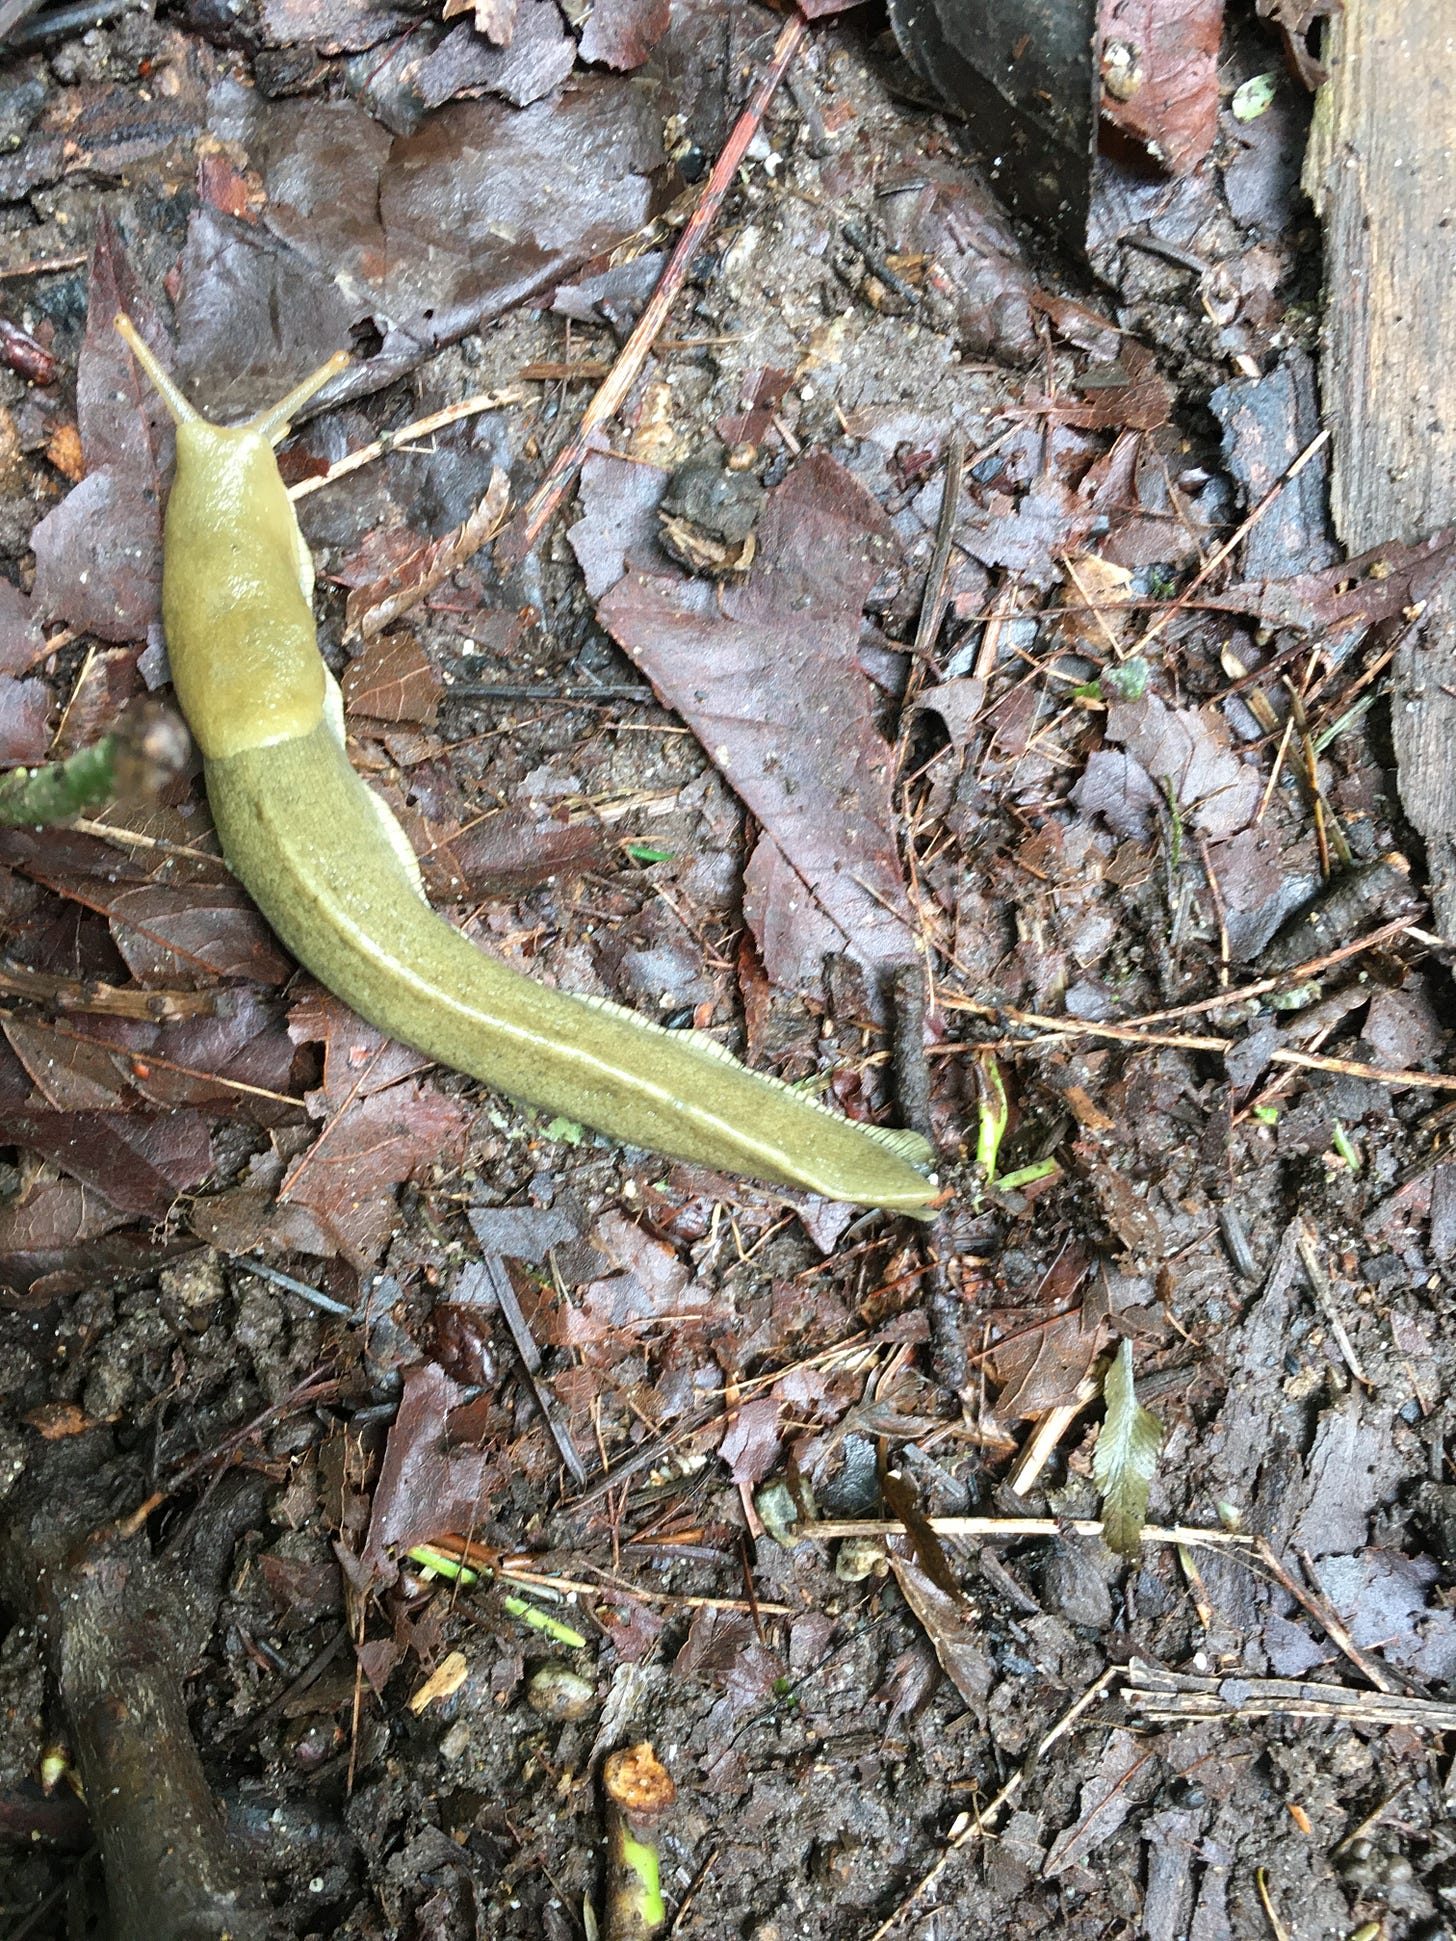 long slug with antenae out sliming along over a ground covered in decomposing leaves and tiny twigs